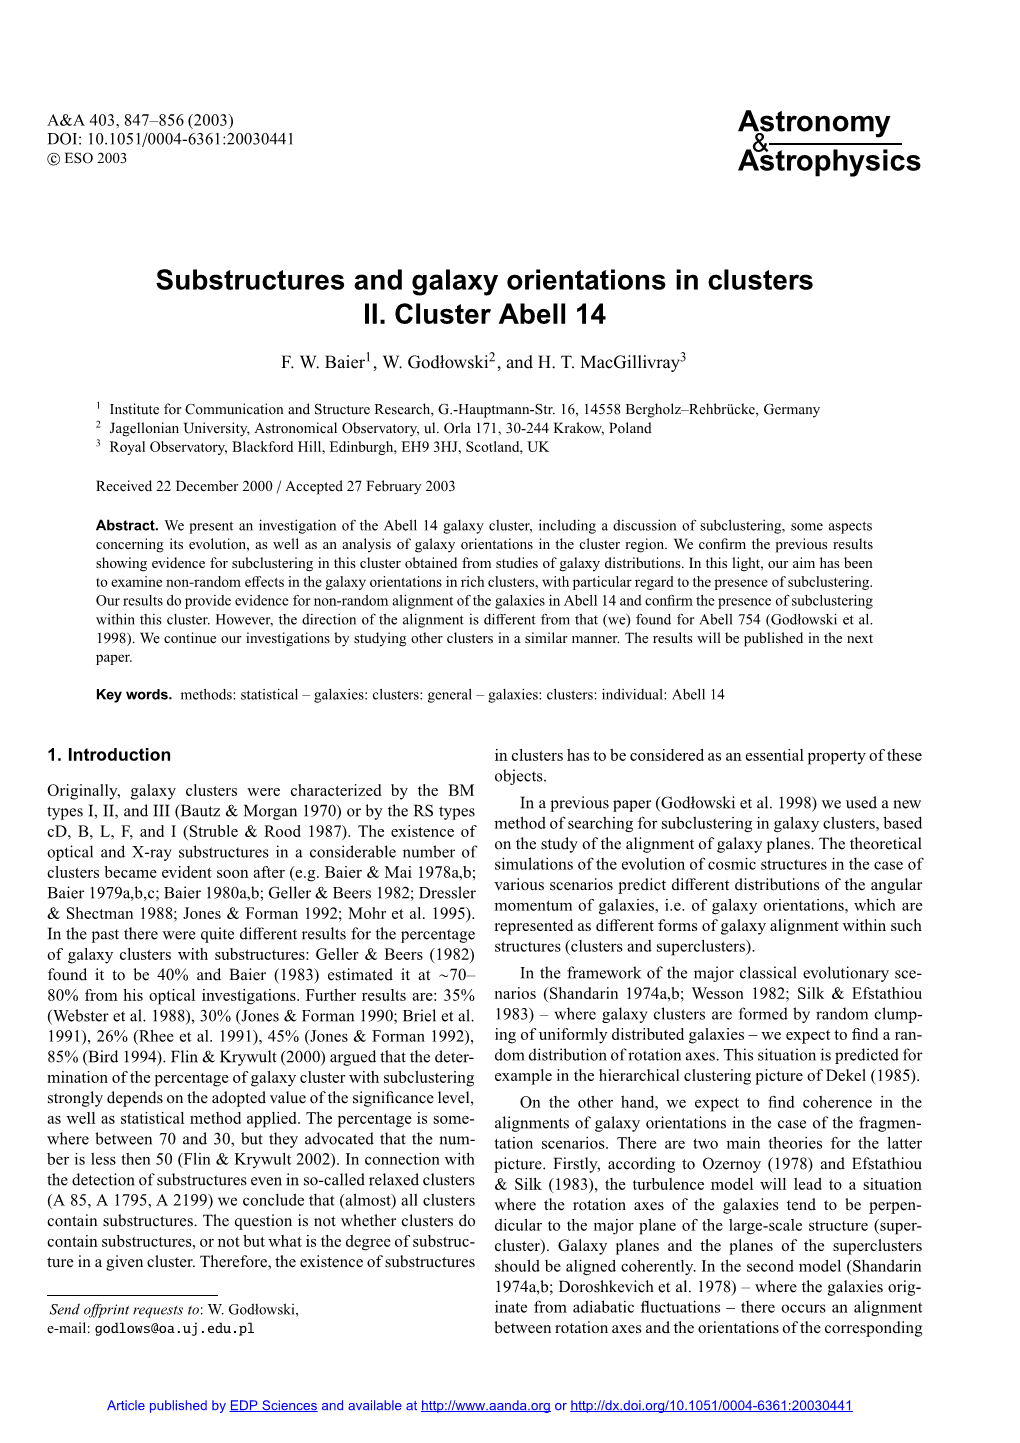 Substructures and Galaxy Orientations in Clusters II. Cluster Abell 14